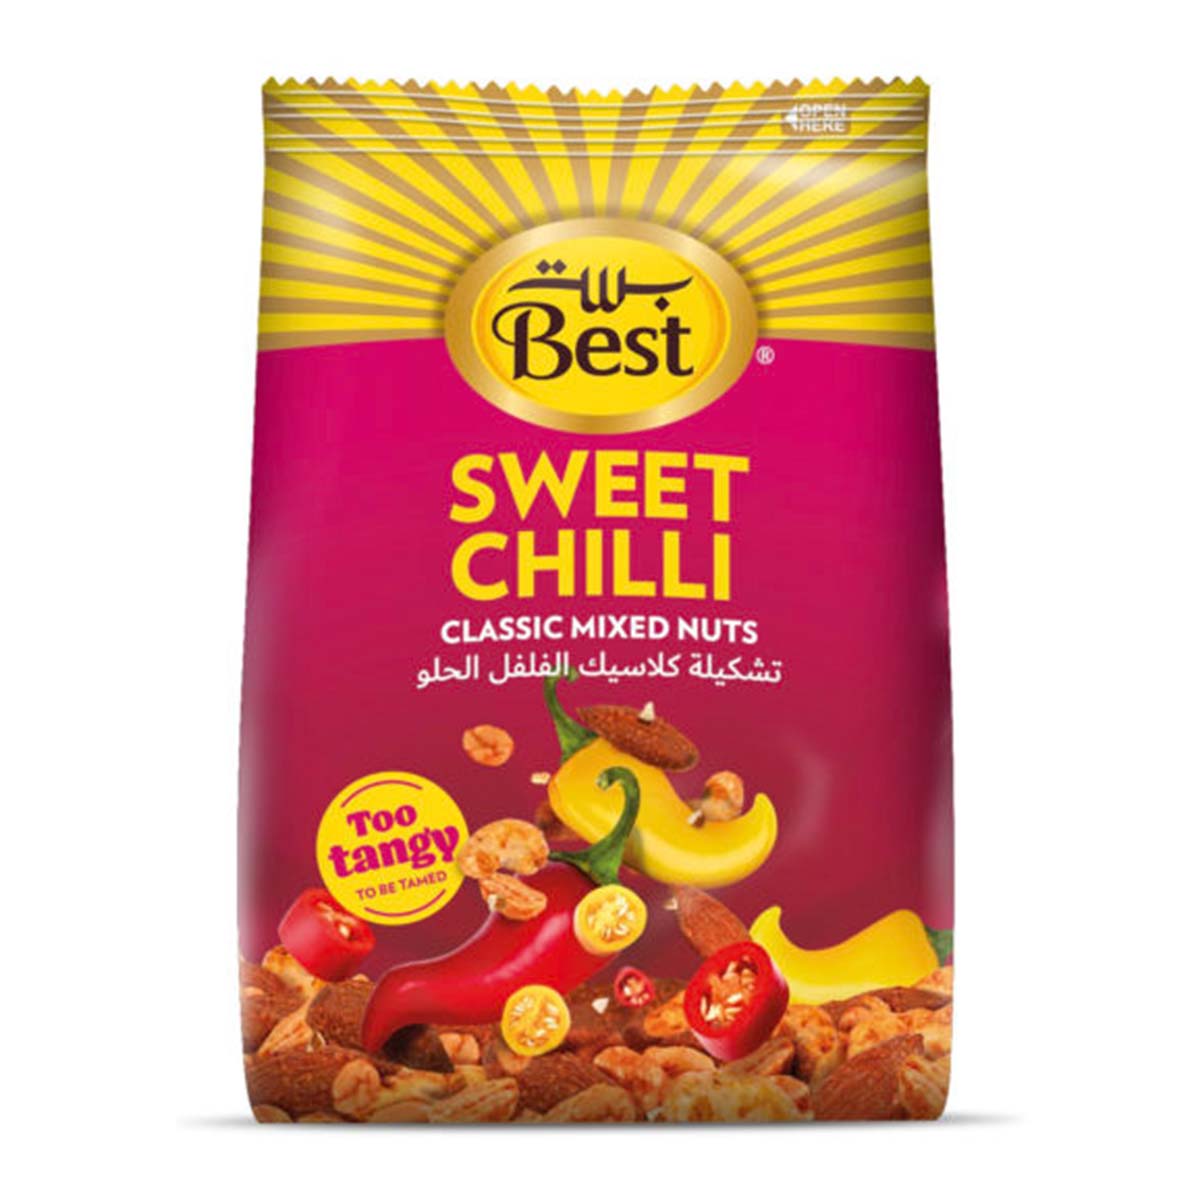 Classic Mixed Nuts (Sweet Chilli) 150g